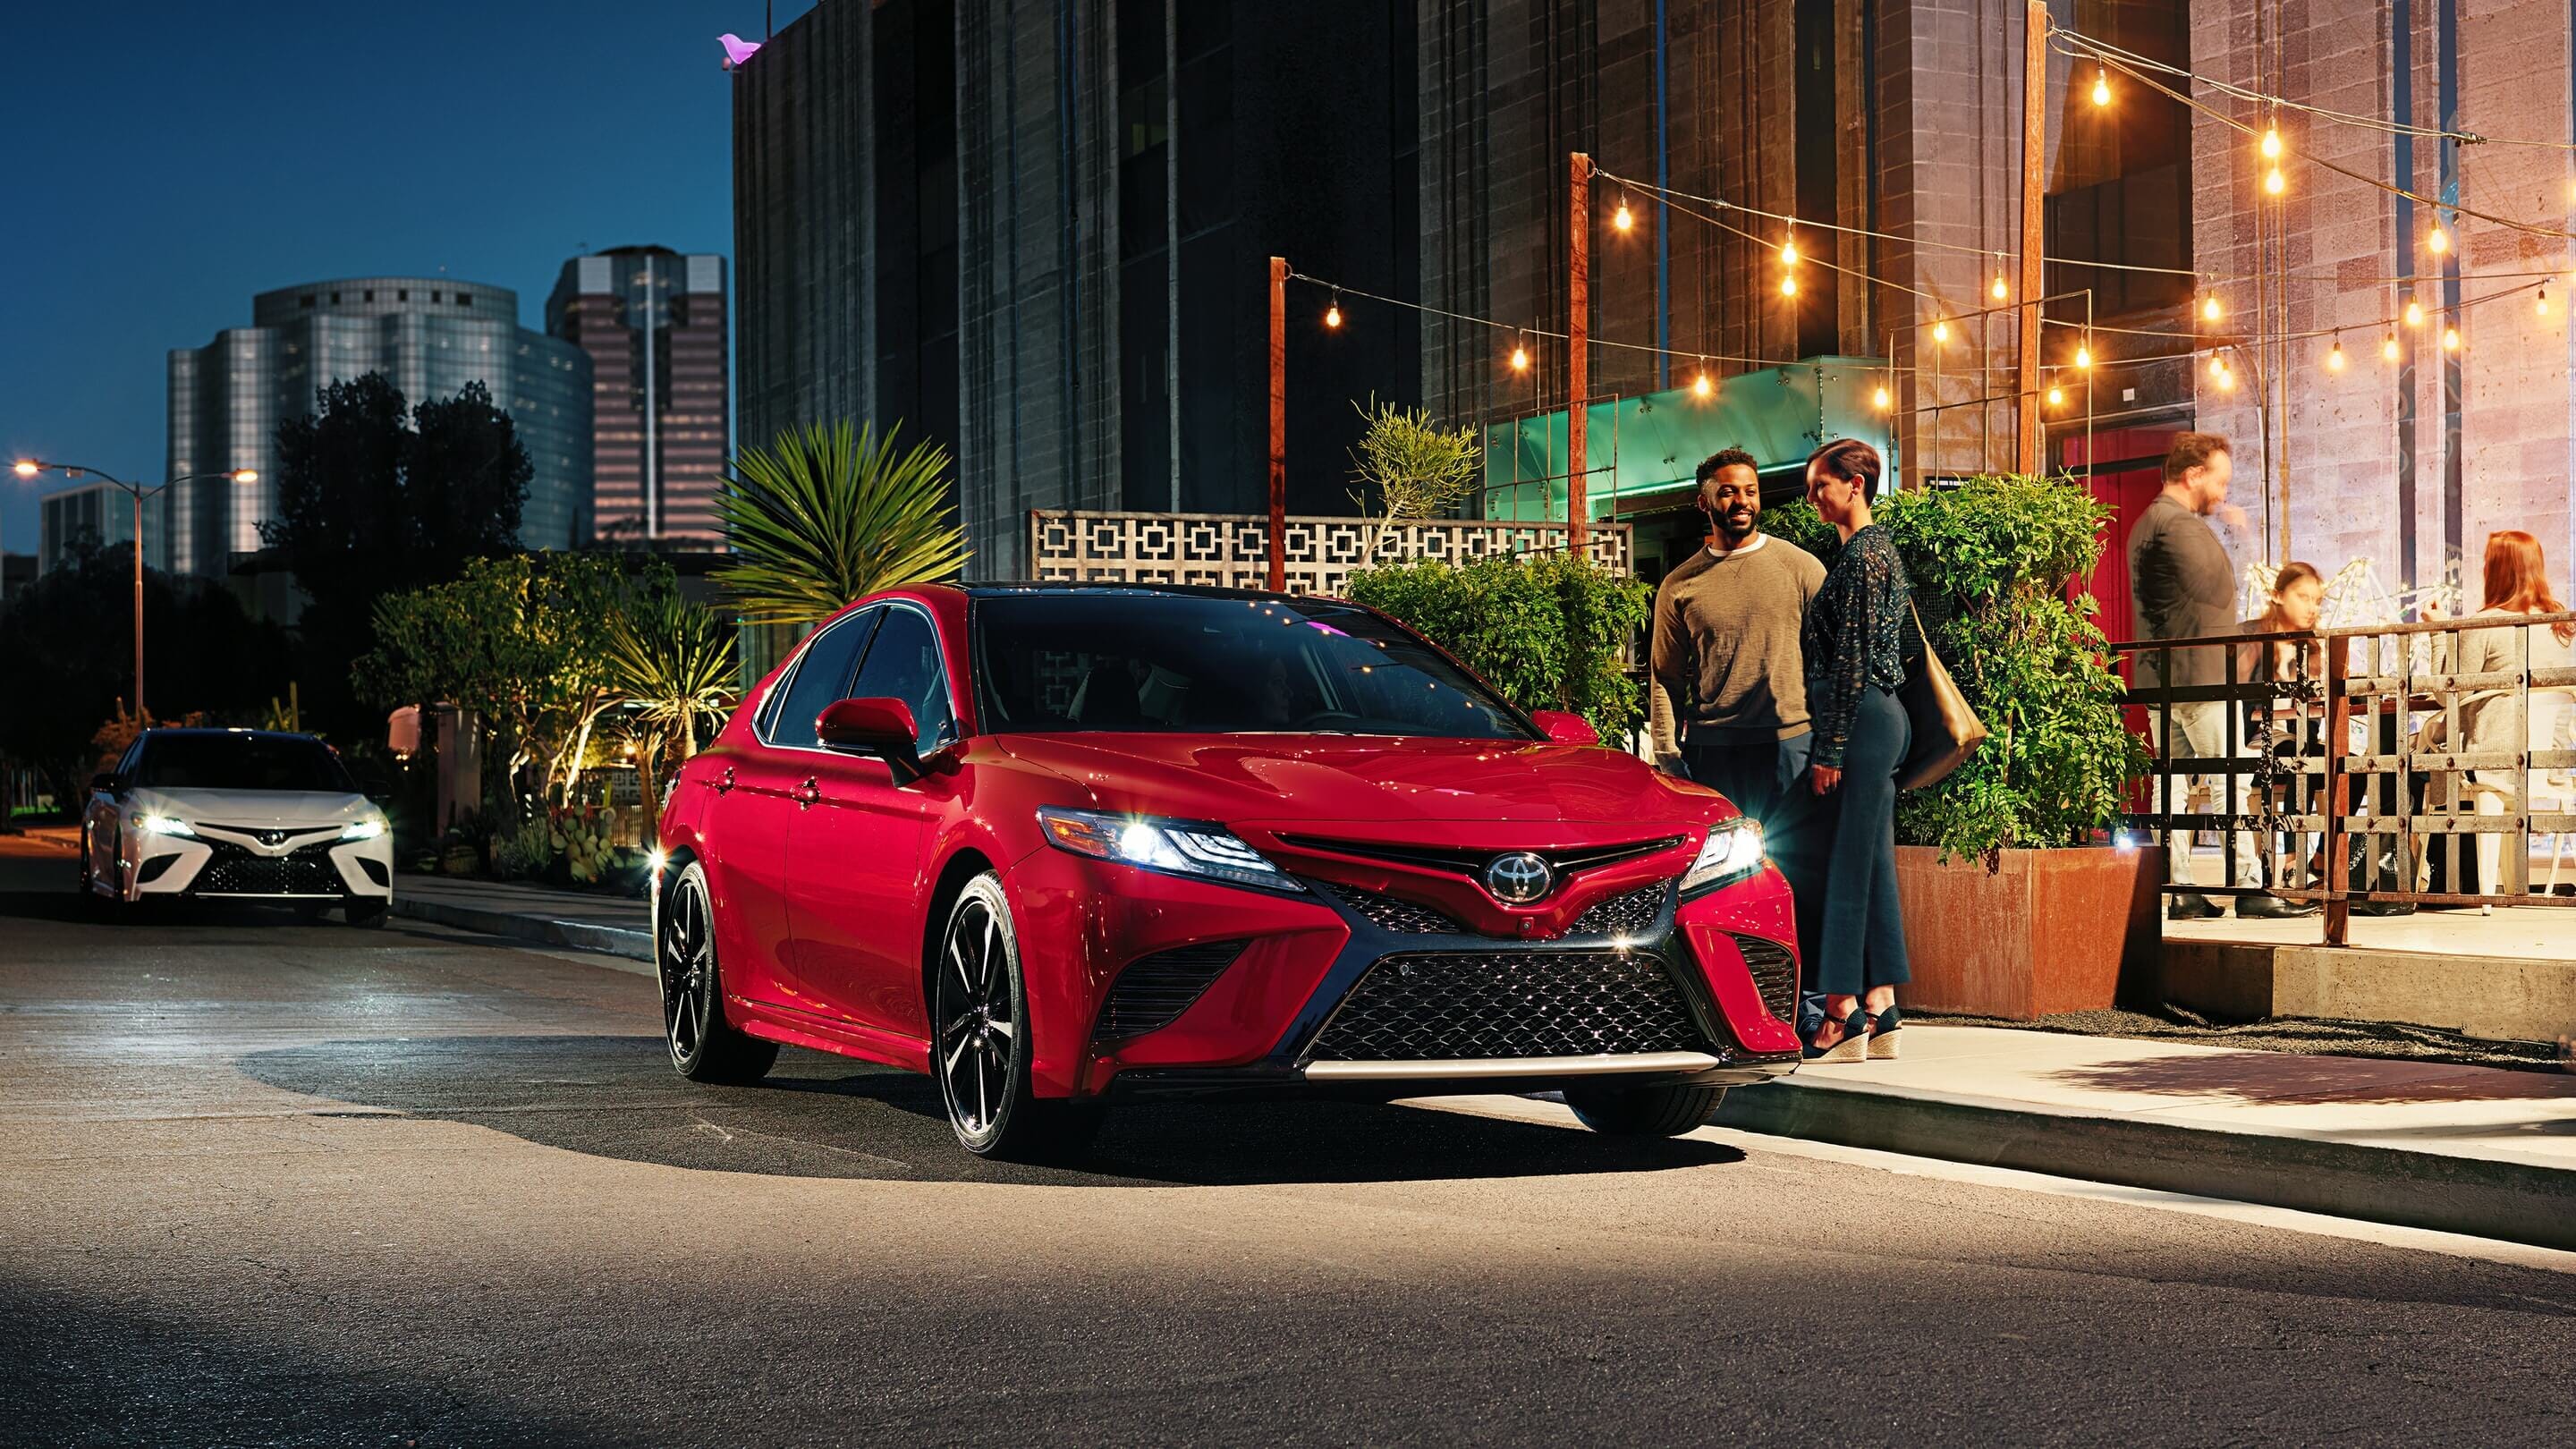 Looking for our best deals on Camry? Lease now with 0 down. All at